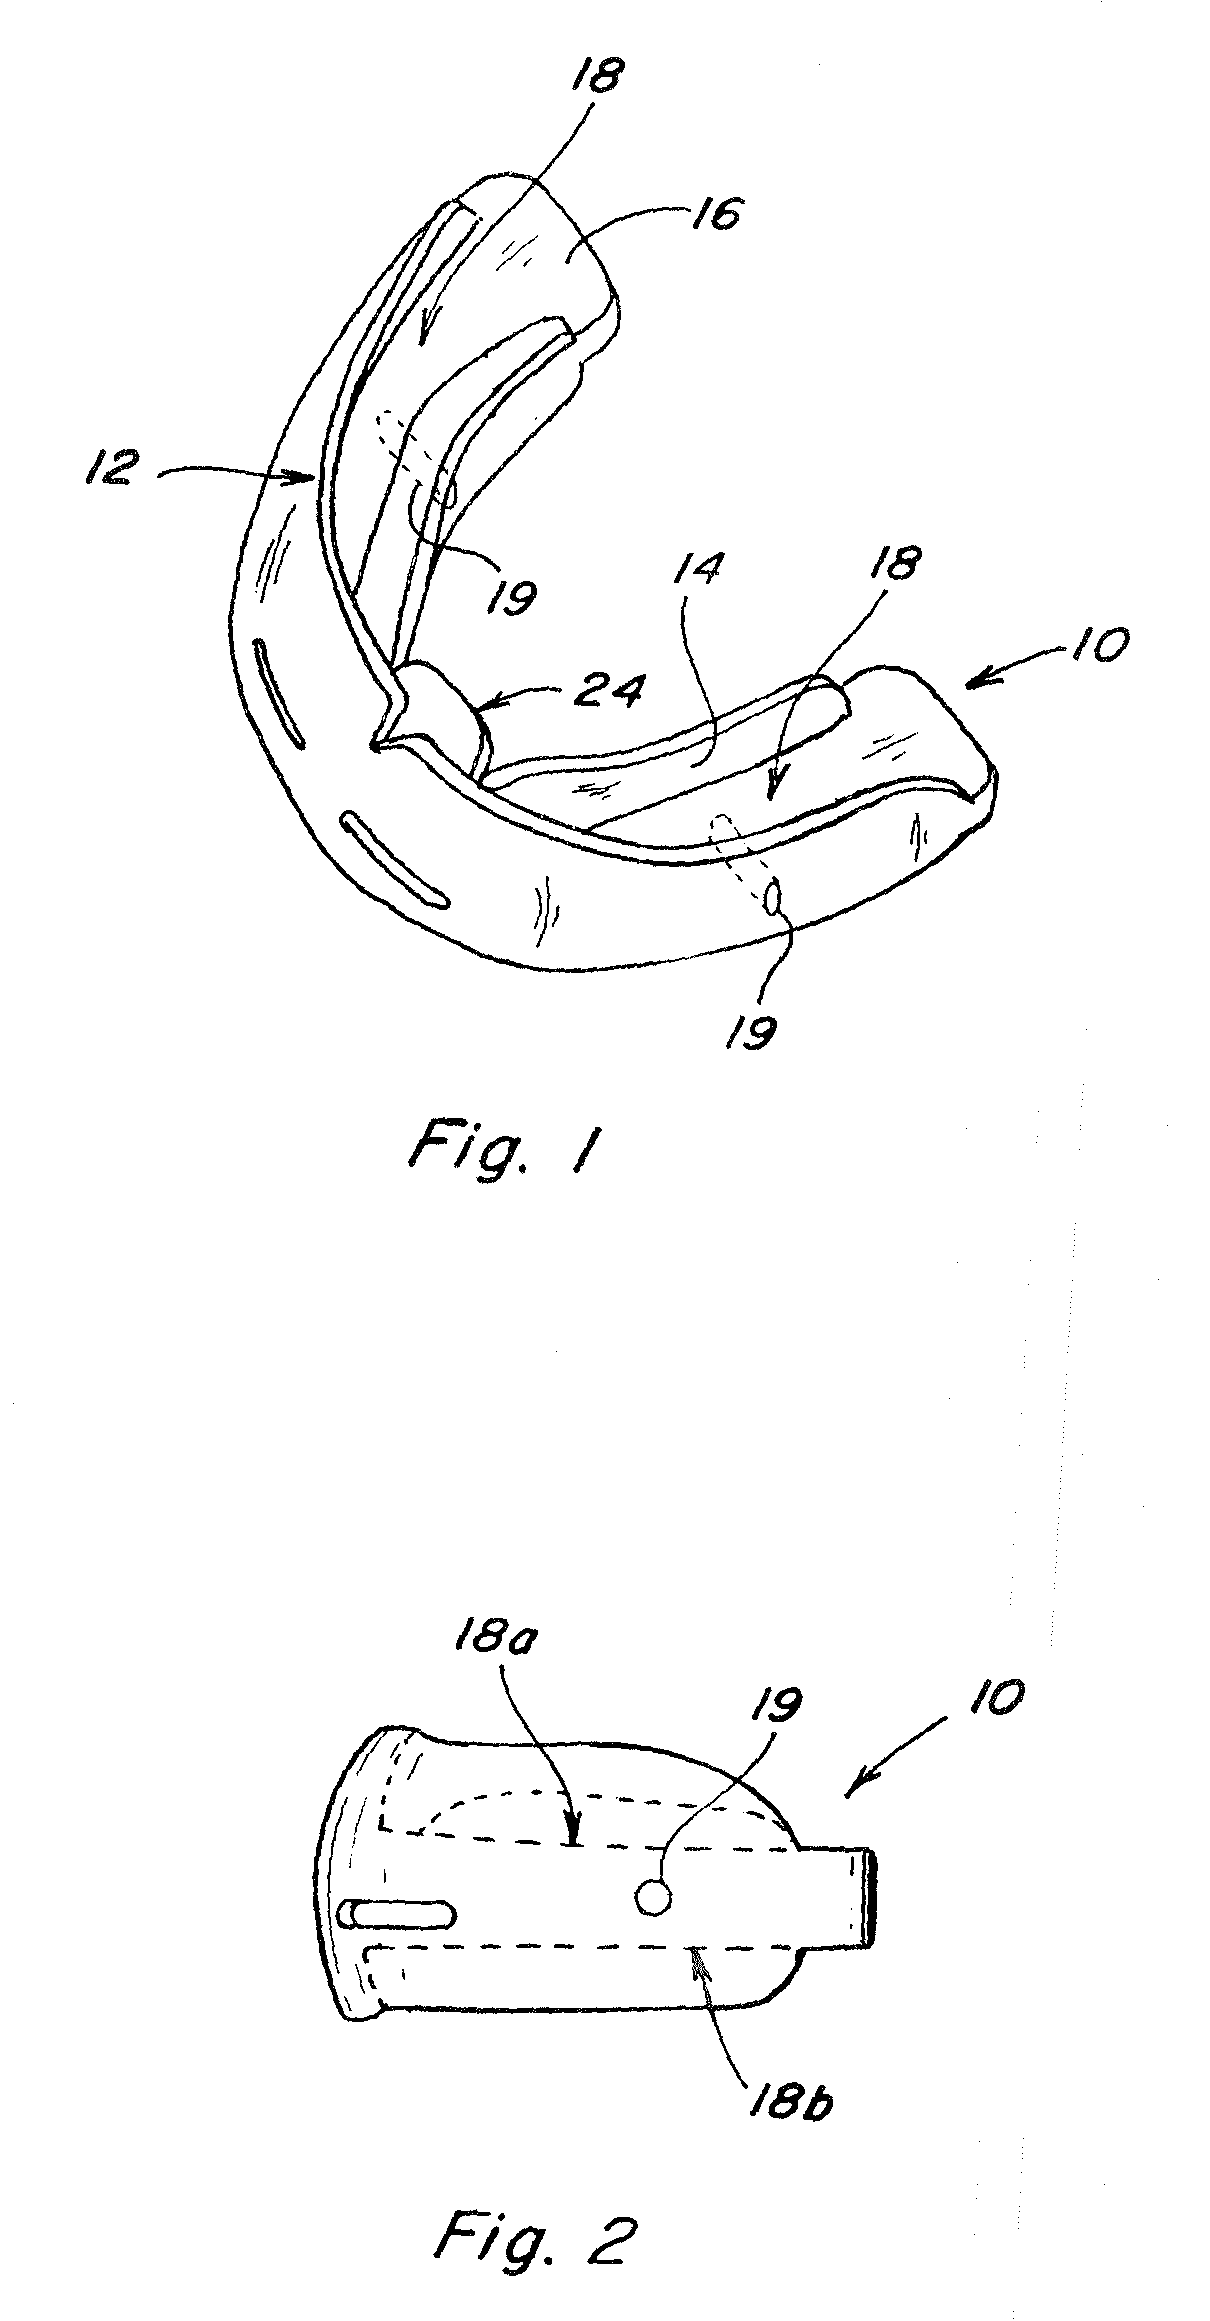 Dental bite construction for performance enhancing mouth guards